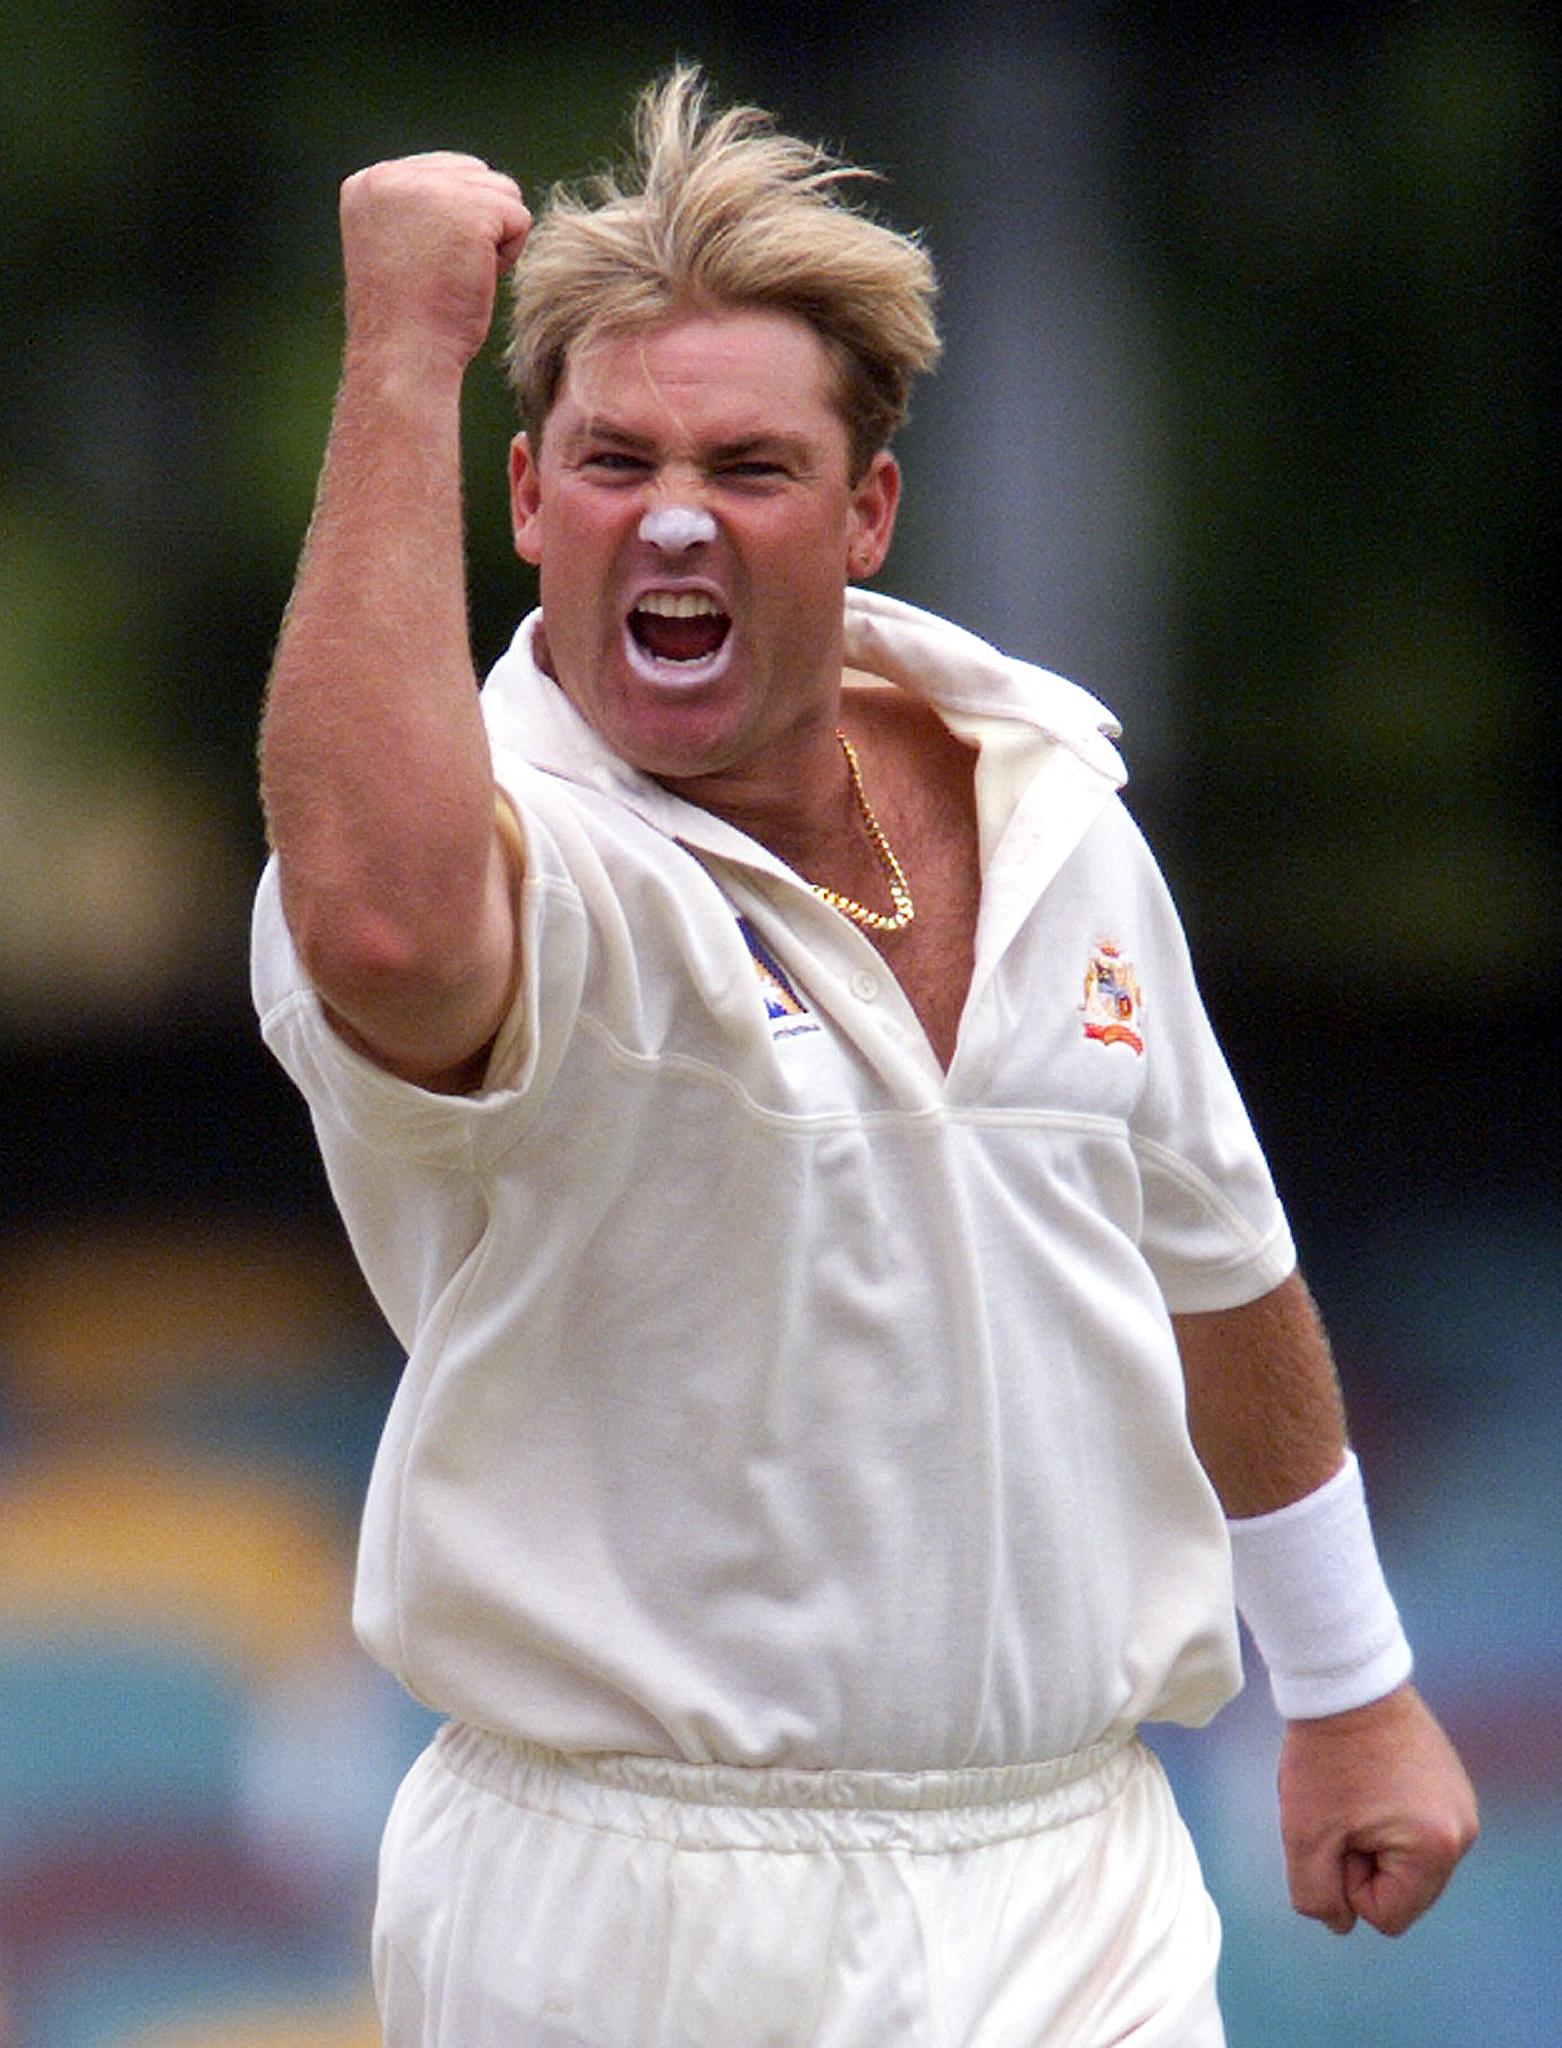 Shane Warne and Terry Jenner